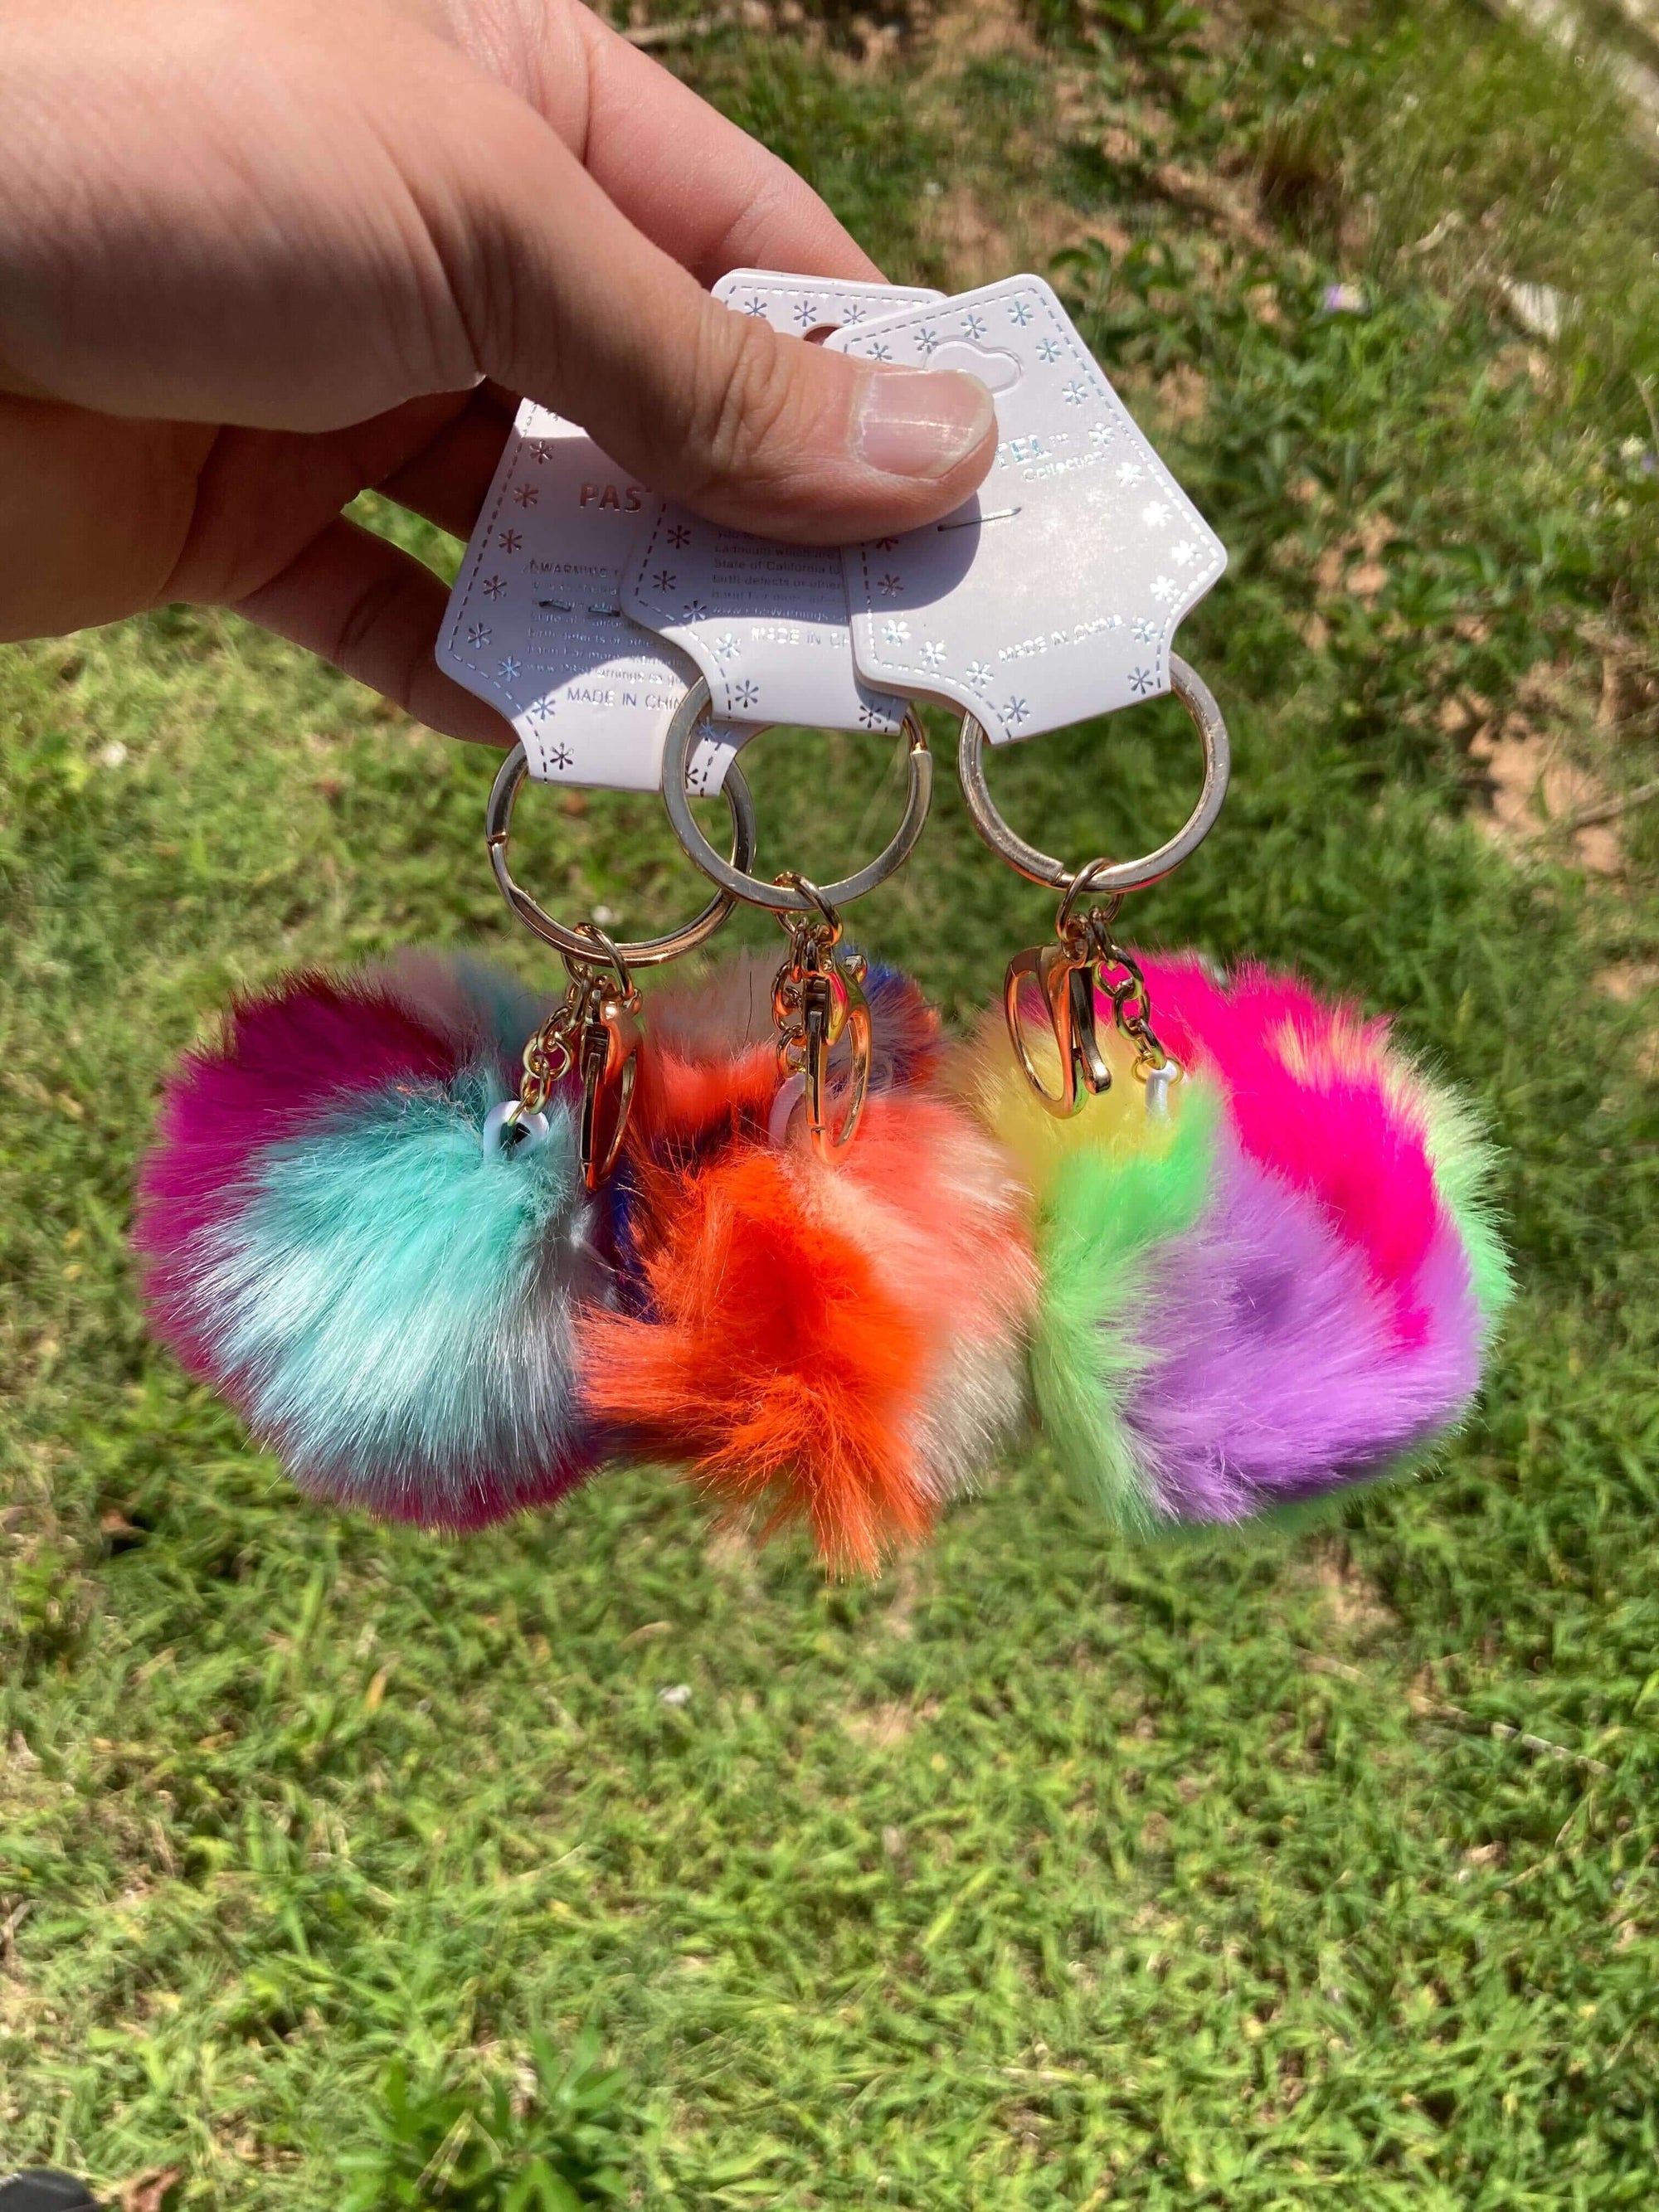 Pom Pom Puff Furry Keychains Bright Assorted Colors (12PC) #ENK493